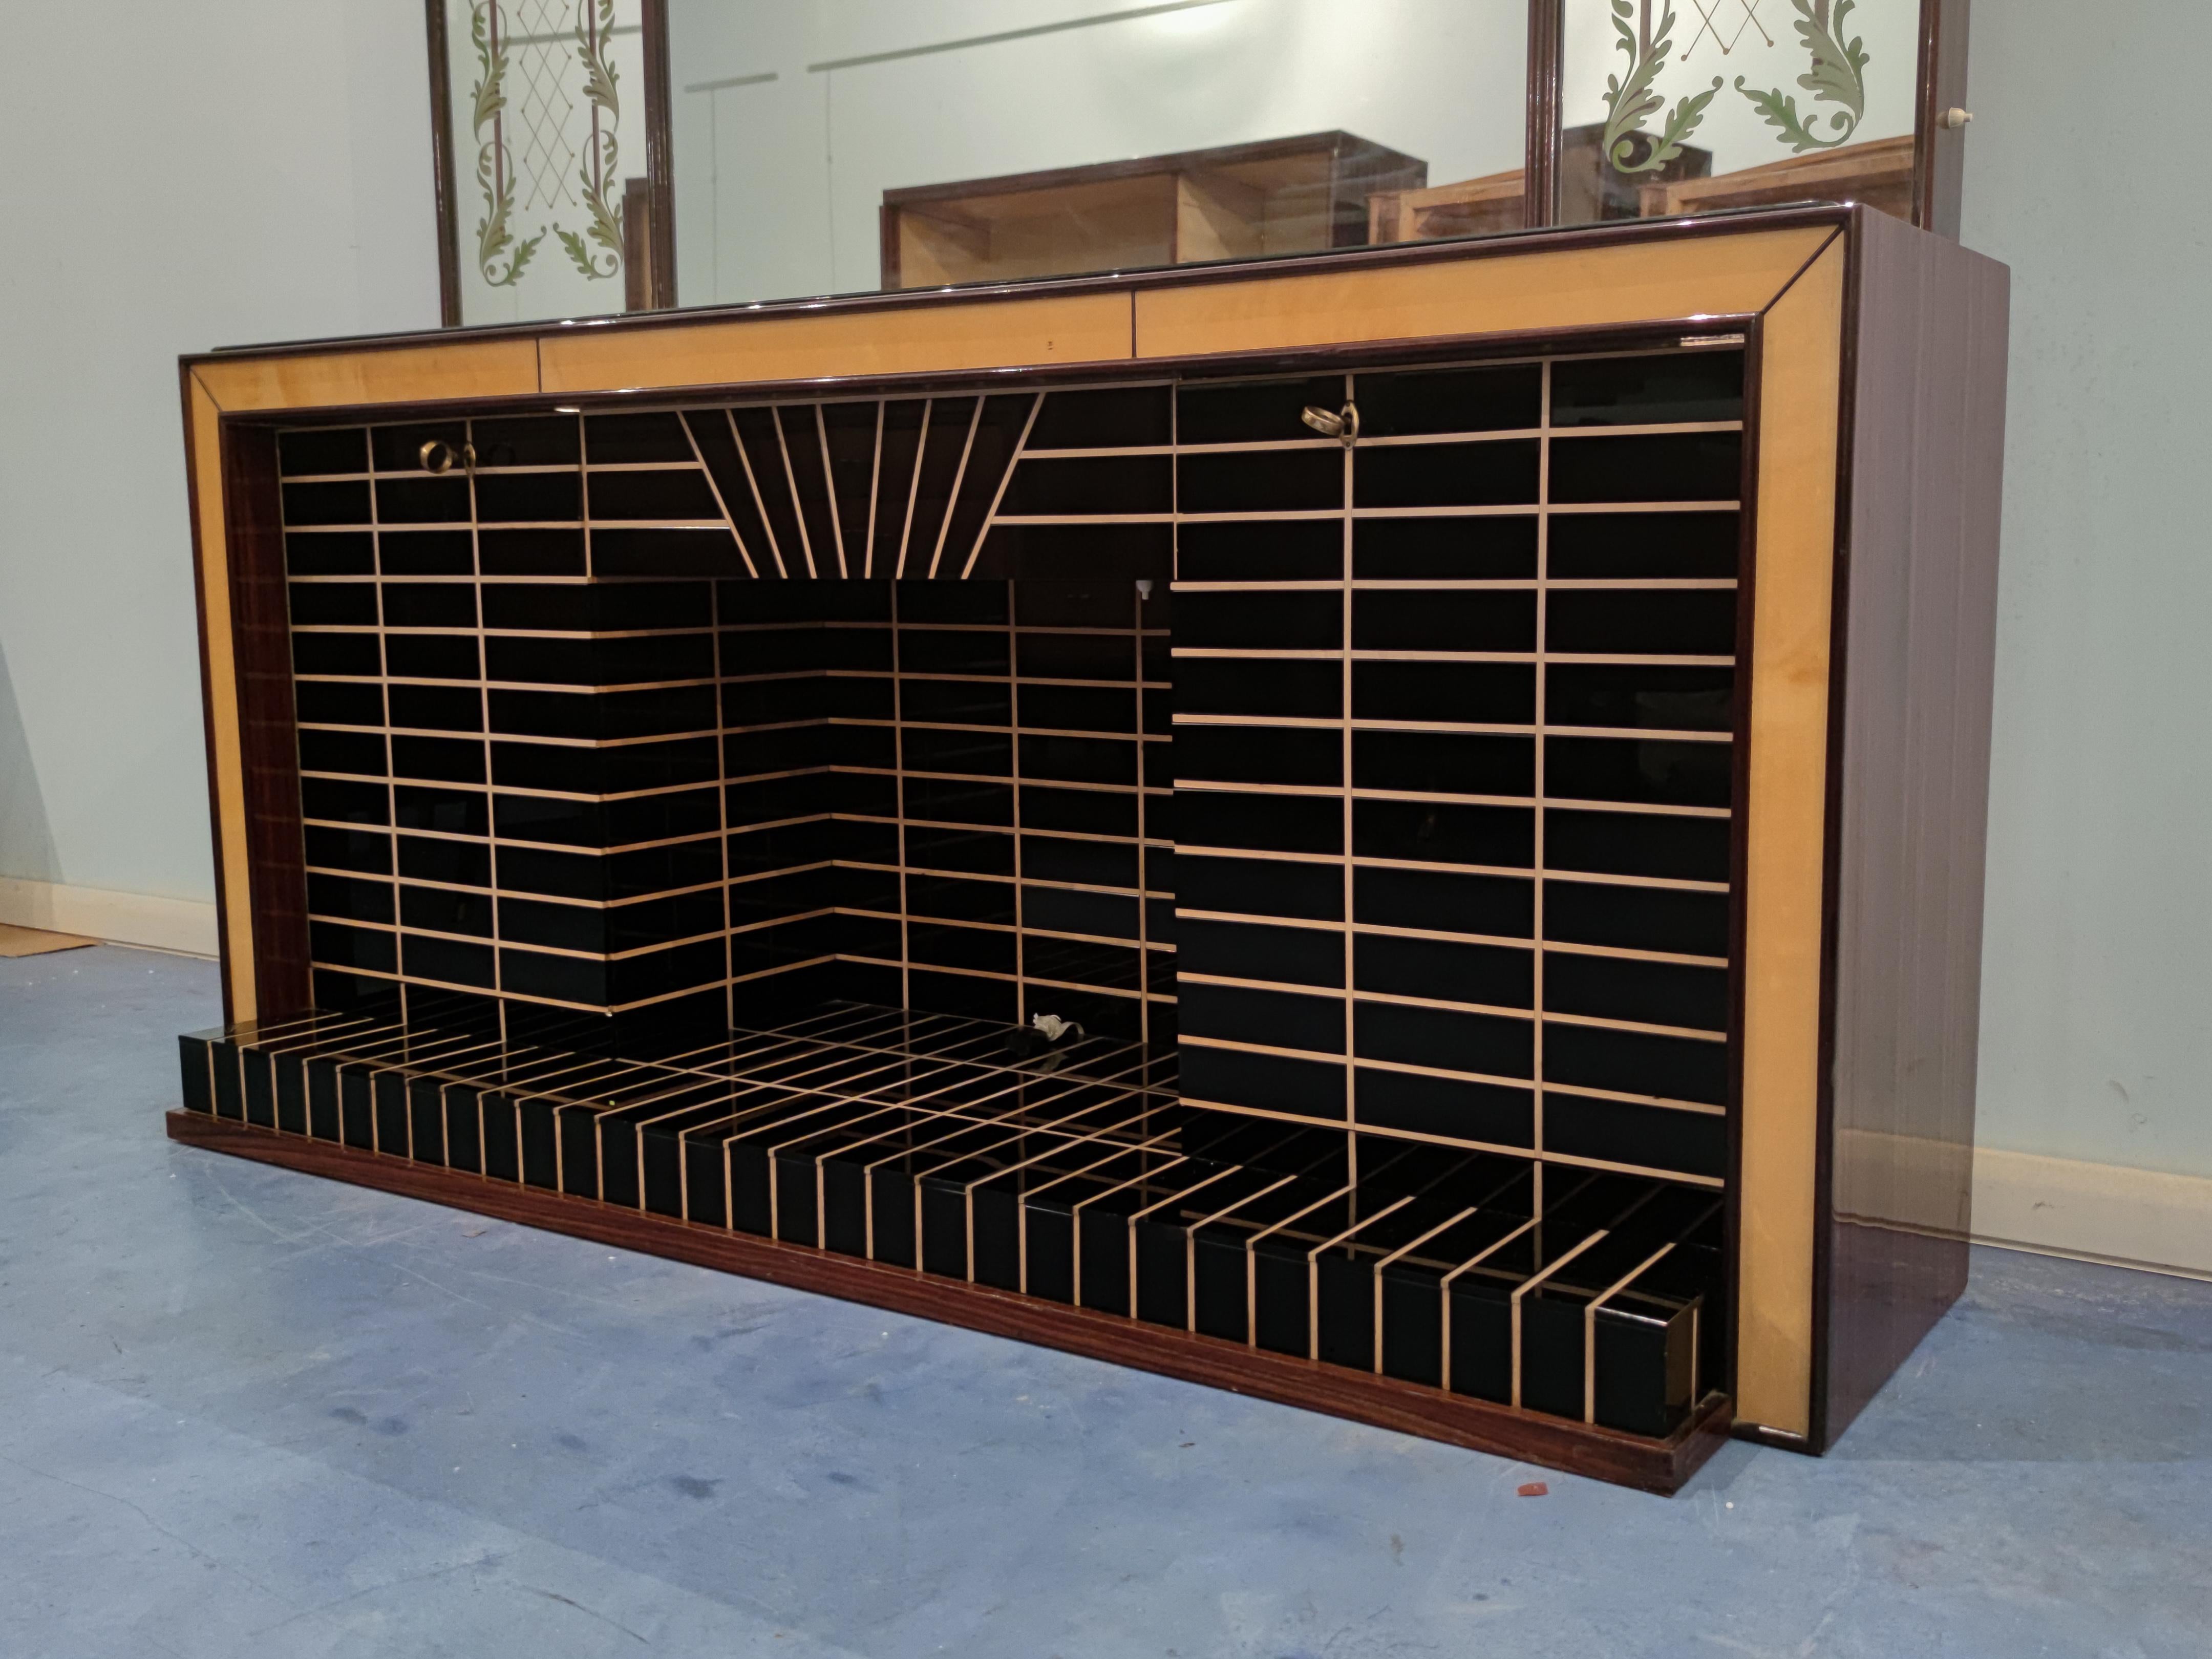 Mid-20th Century Italian Mid-Century Sideboard Cabinet Bar with Mirror by Luigi Brusotti, 1940s For Sale